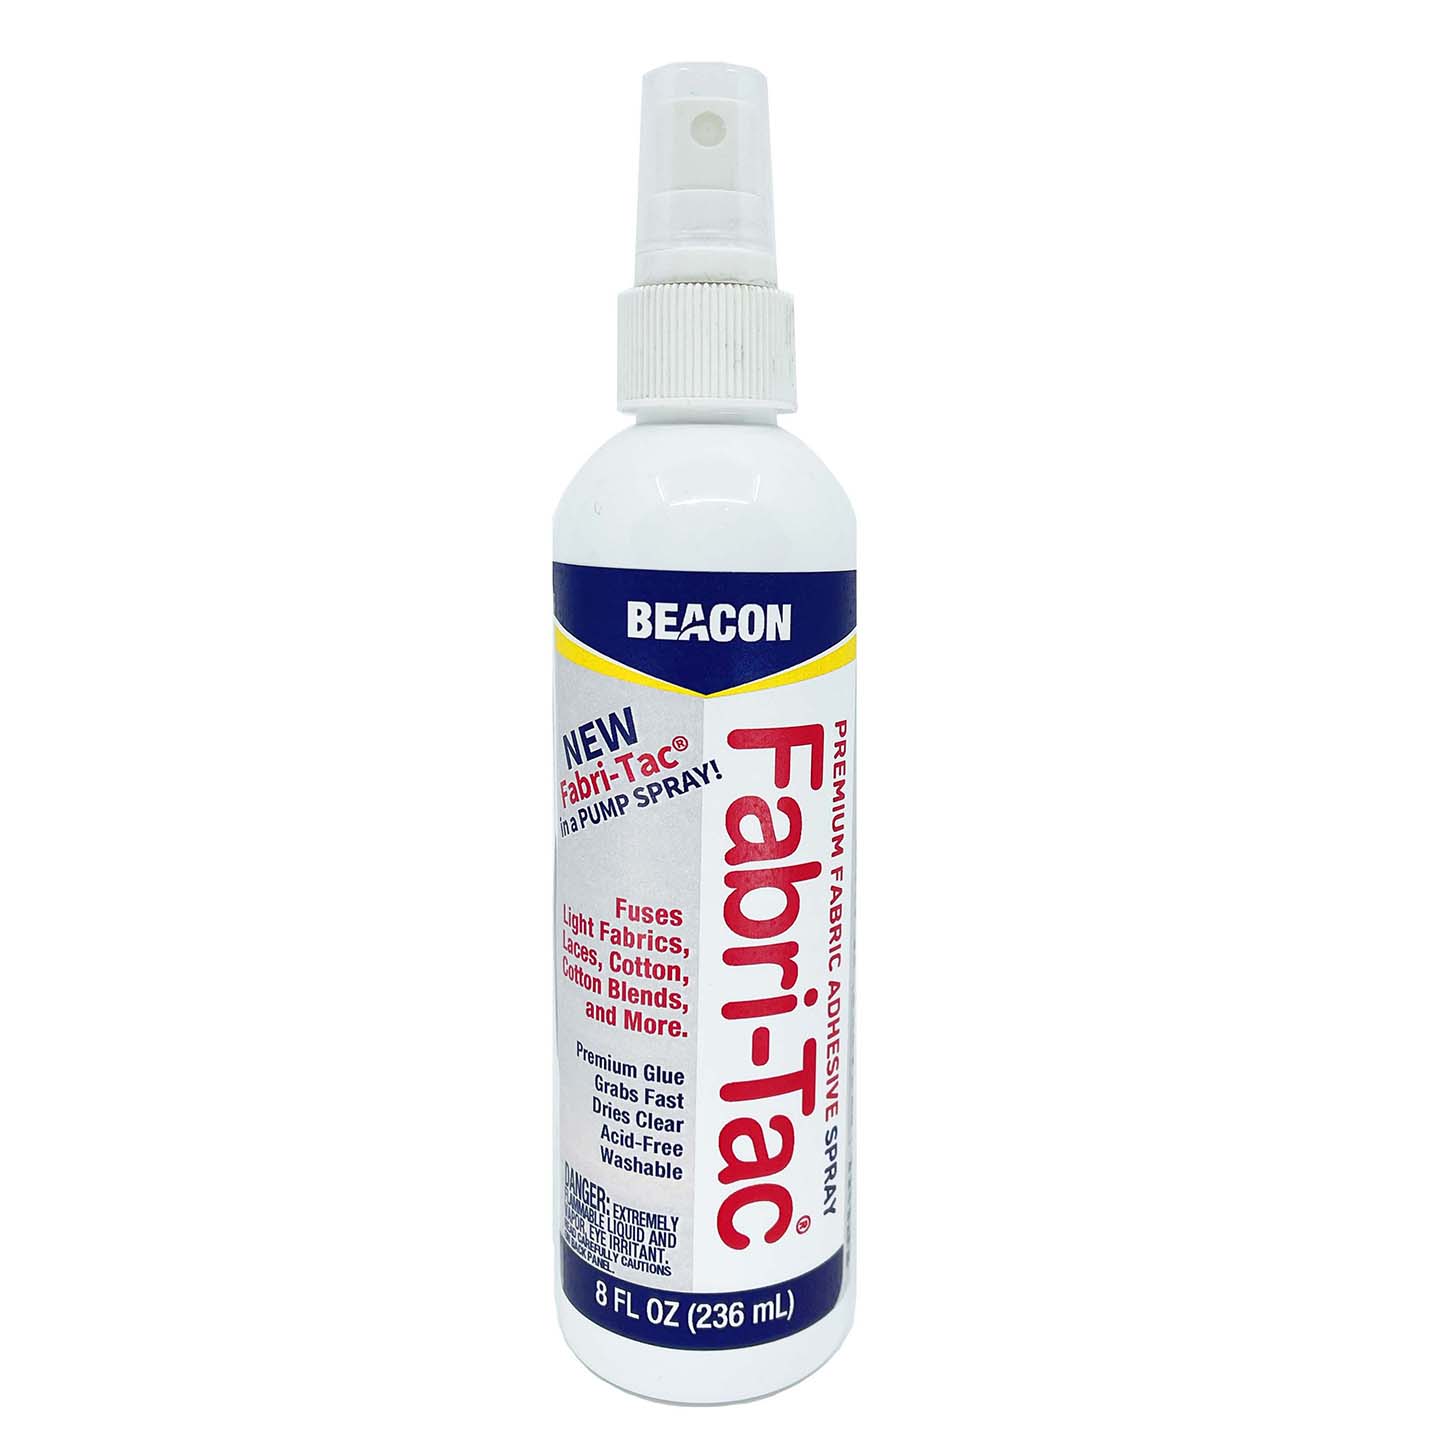 Polymat 770X MULTIPURPOSE CLEAR MIST SPRAY GLUE ADHESIVE HIGH TACK FAST DRY  - Helia Beer Co